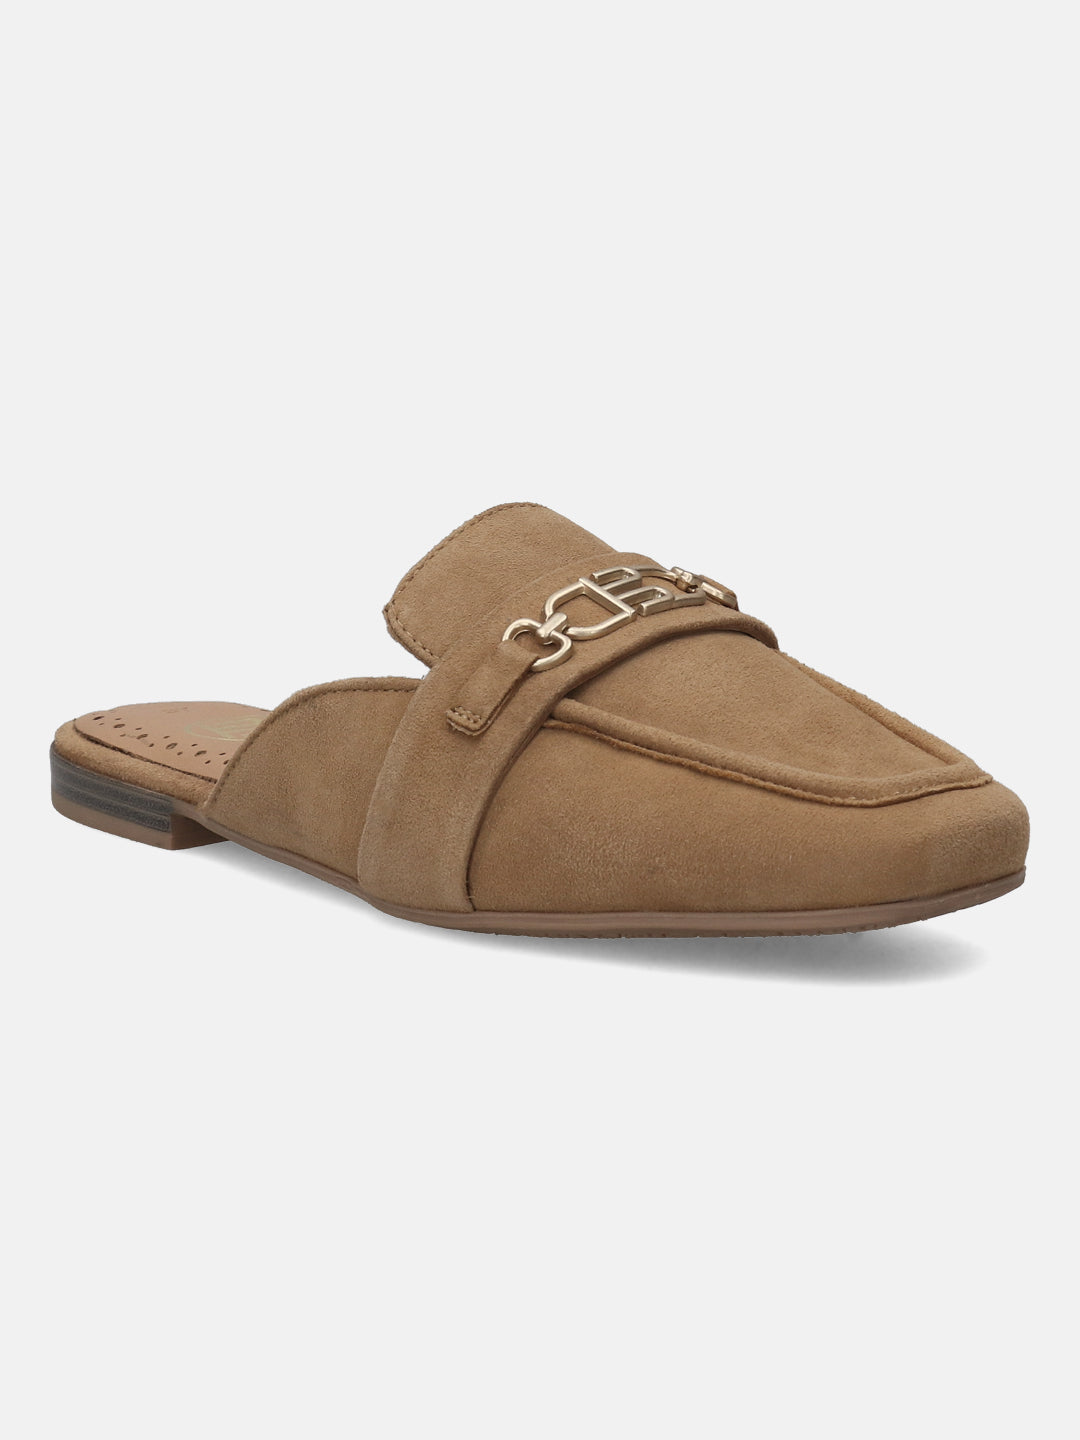 Anela Light Brown Suede Mules